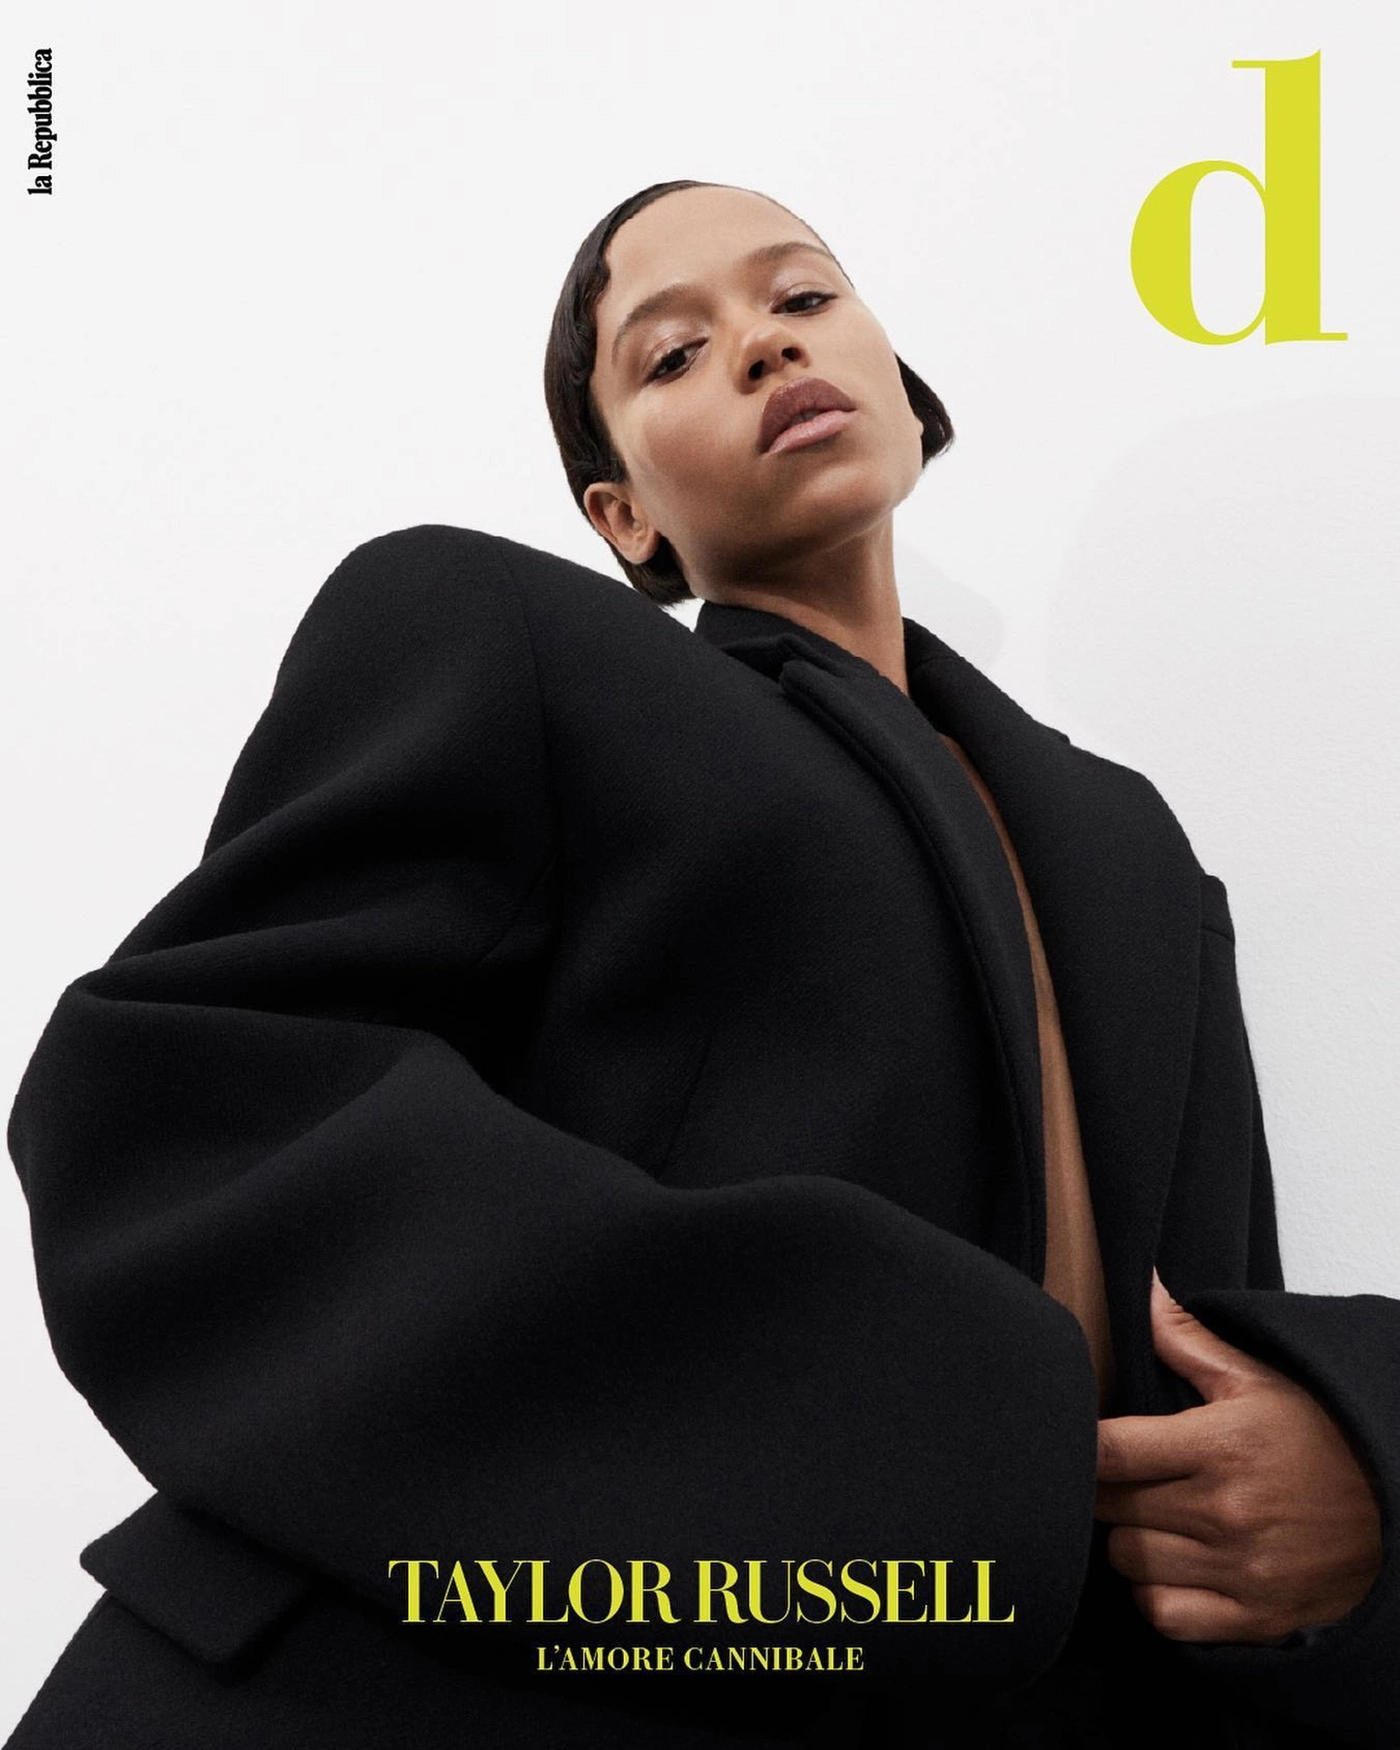 Taylor Russell covers D la Repubblica August 27th, 2022 by Alessio Bolzoni